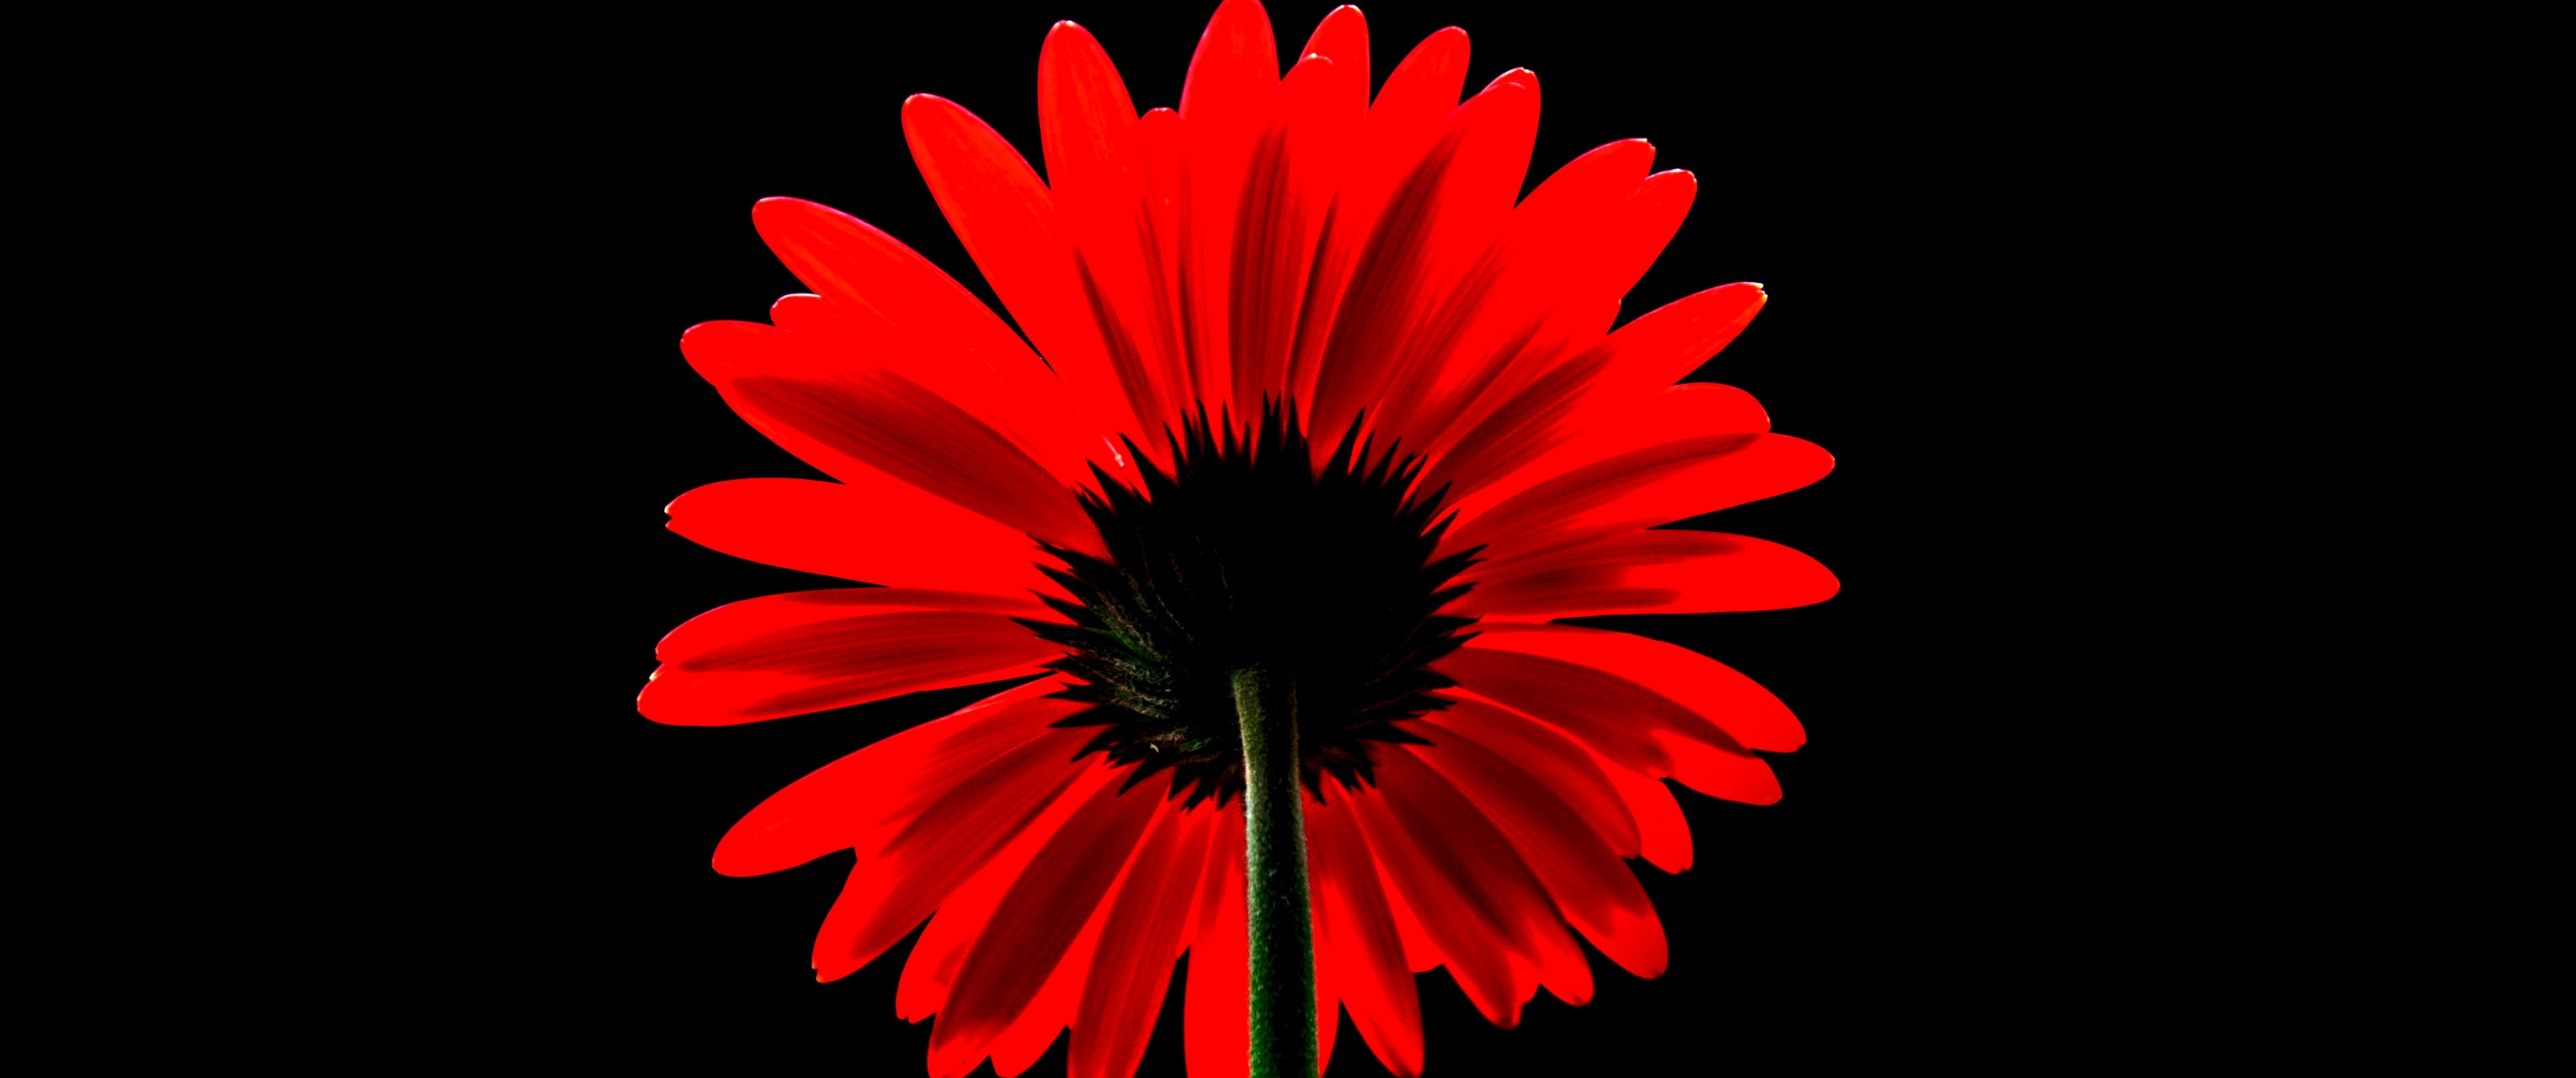 Gerbera Daisy: Originate from South Africa and come in various sizes and colors, including pink, yellow, salmon, orange and white. 3440x1440 Dual Screen Background.